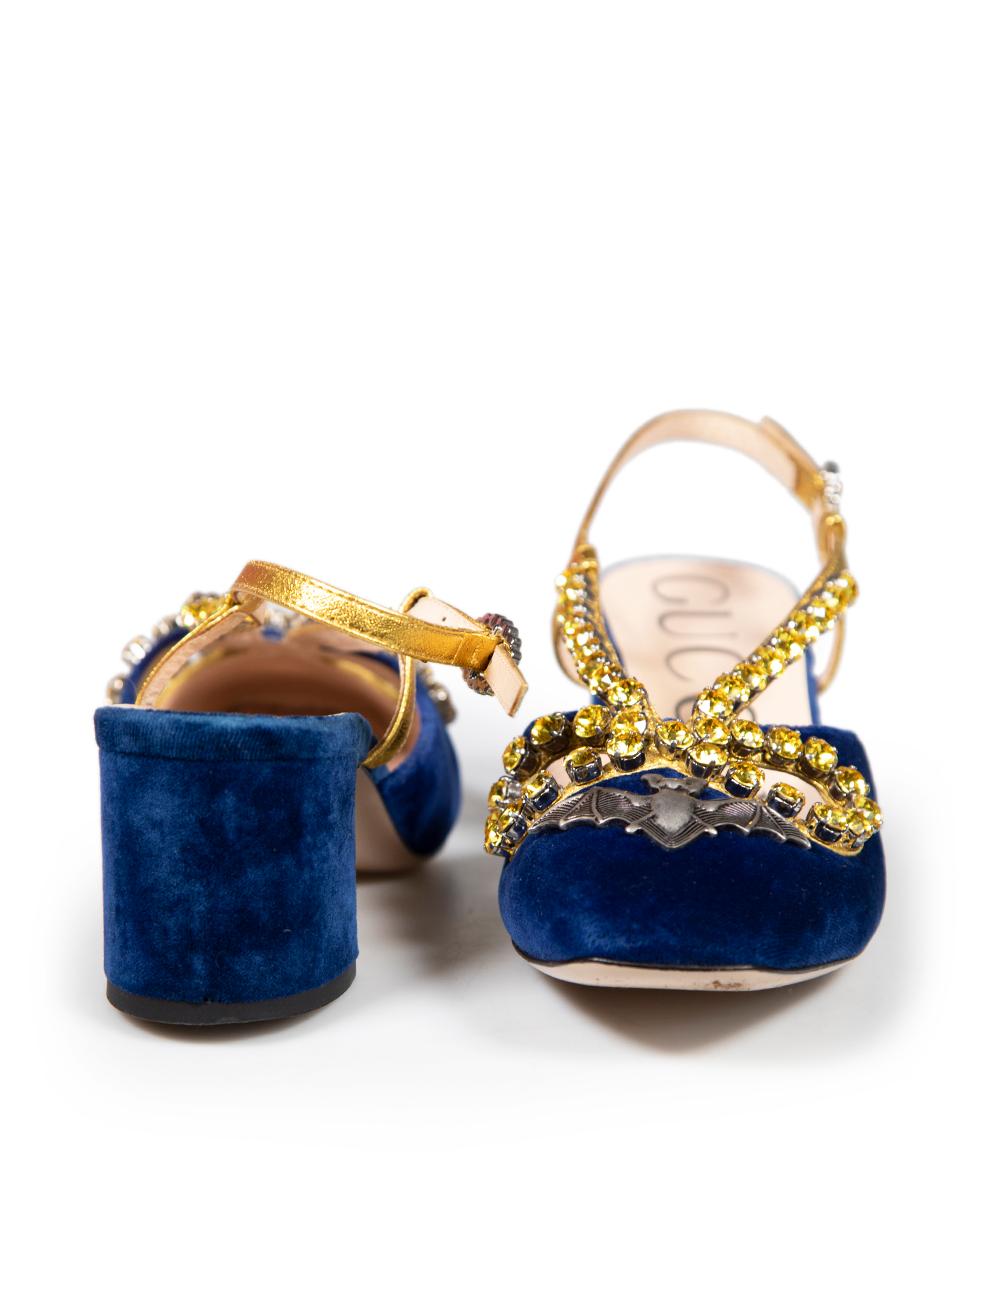 Gucci Blue Velvet Crystal Embellished Heels Size IT 38 In Good Condition For Sale In London, GB